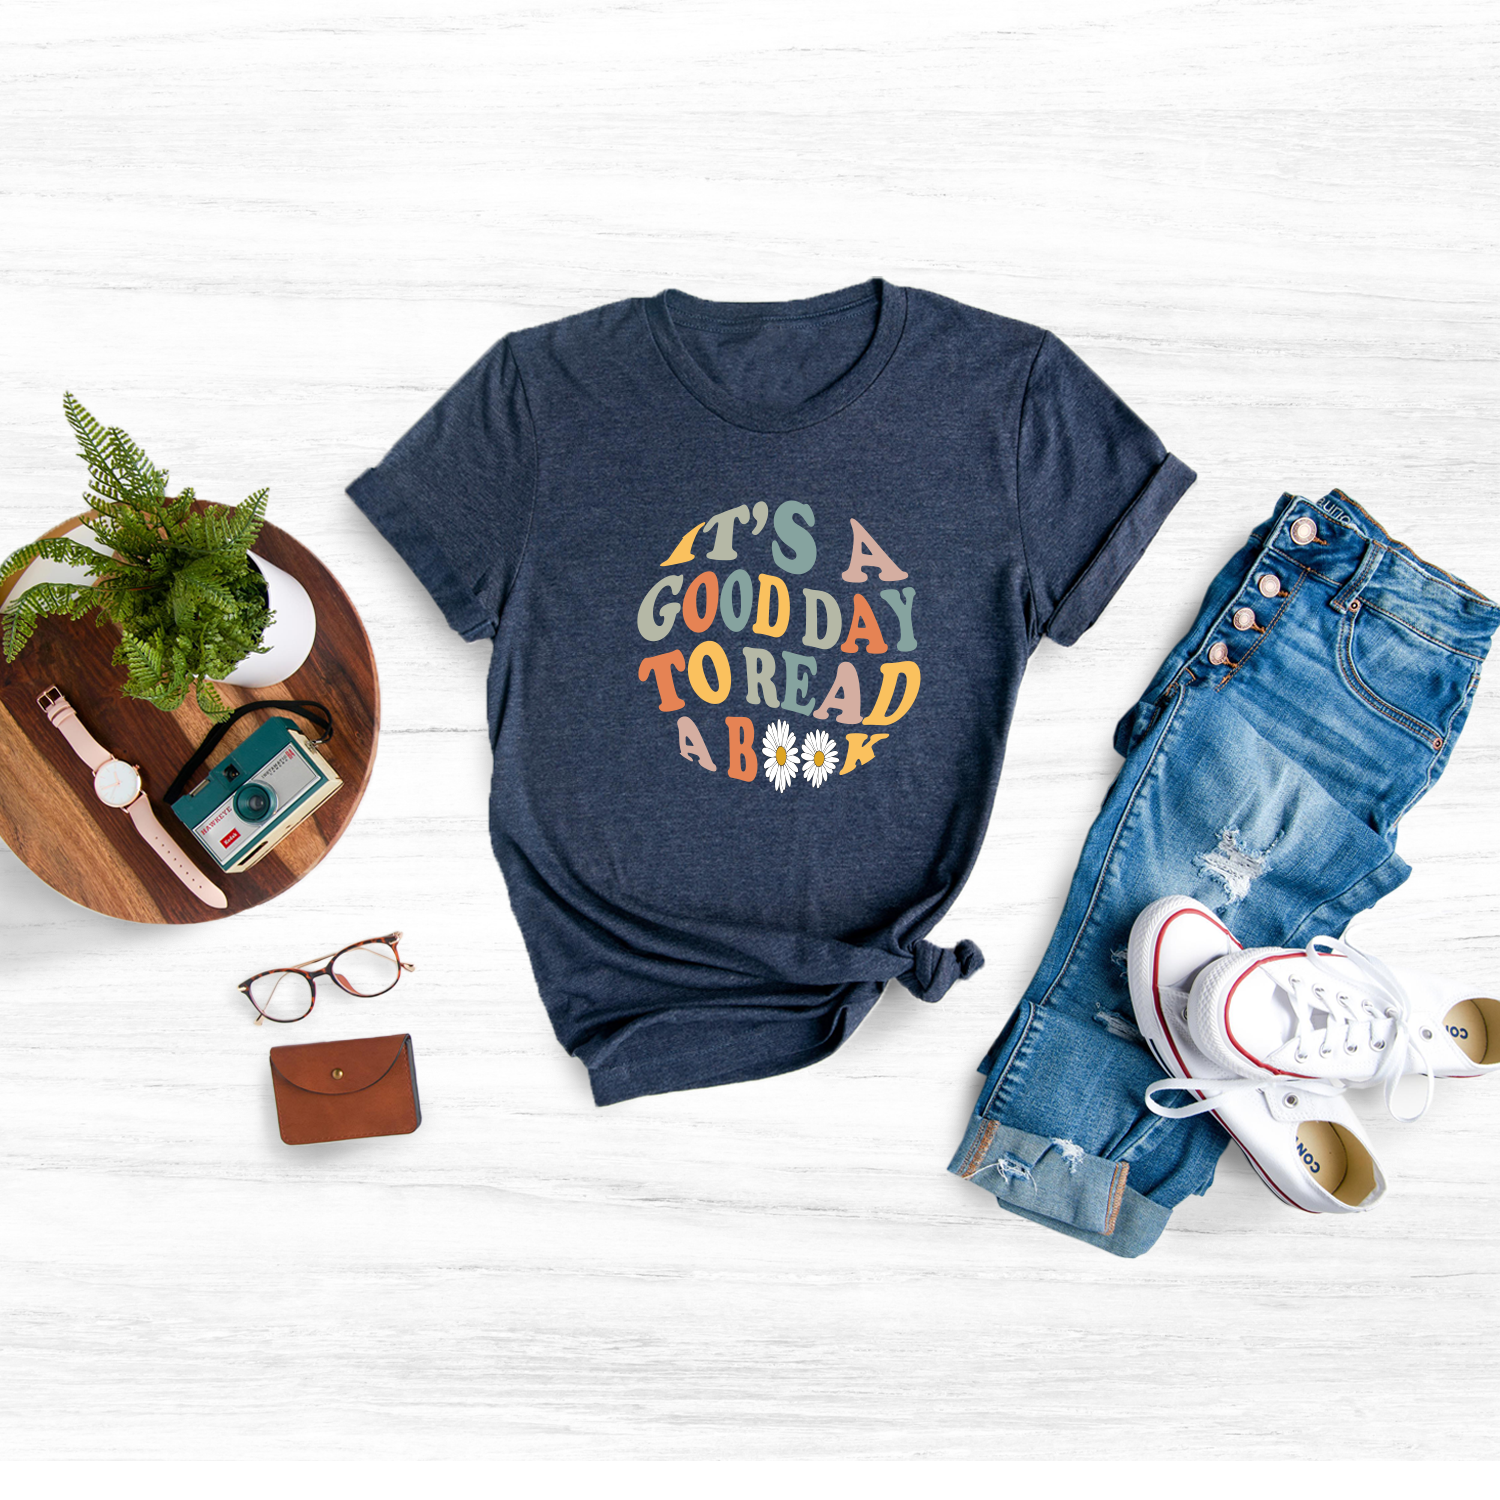 Embrace the Joy of Reading with the "It's A Good Day To Read" Shirt